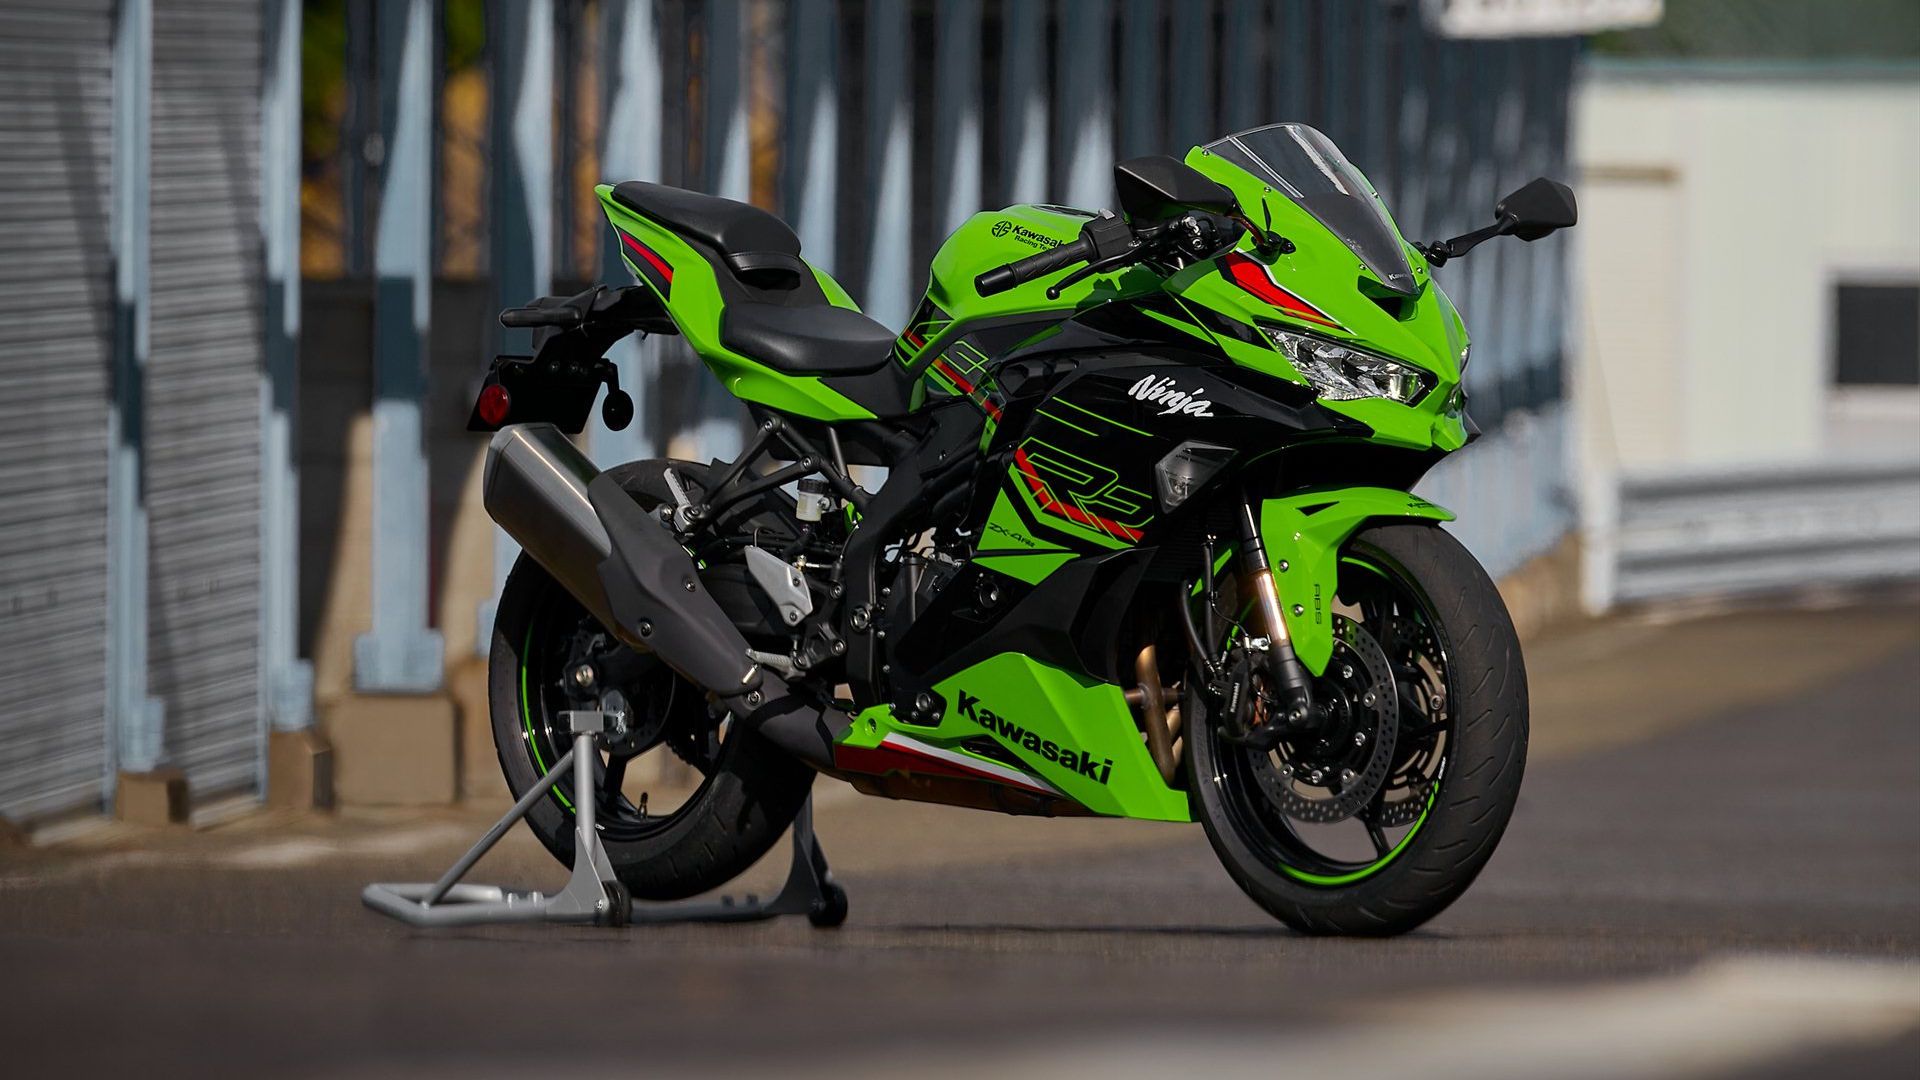 The Japan-Spec Kawasaki Ninja ZX-4R Will Leave You Green With Envy